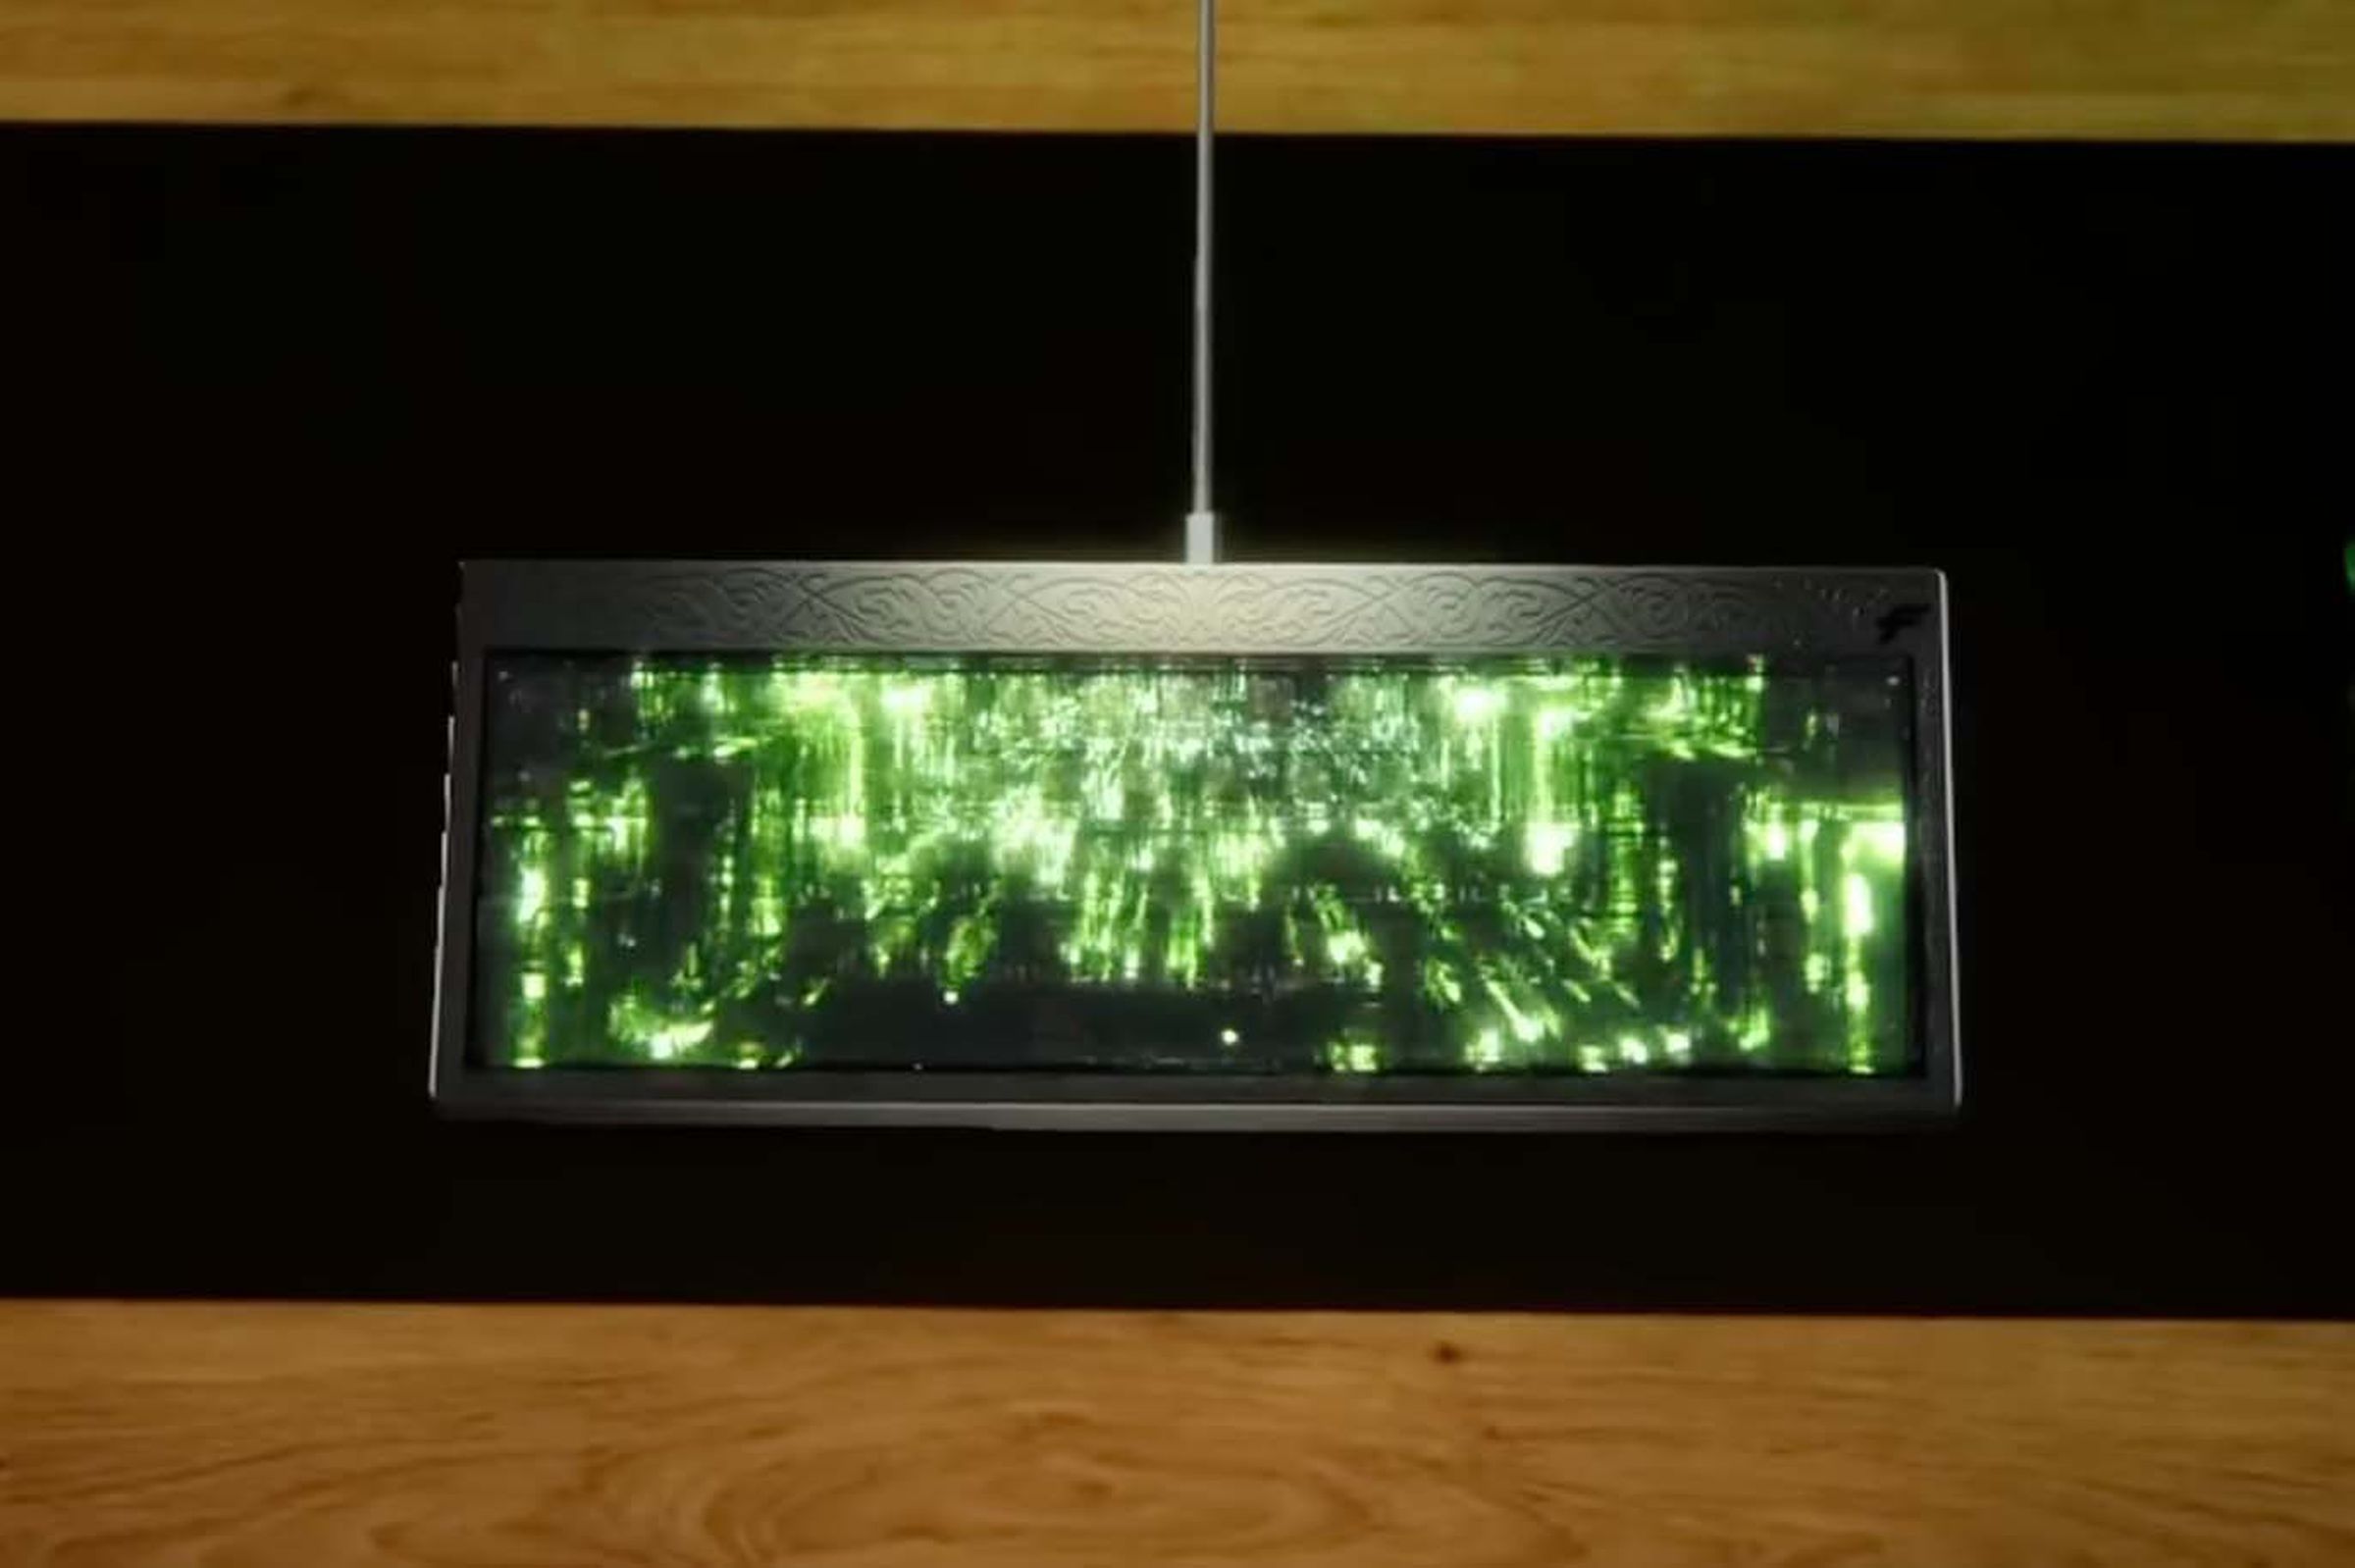 Finalmouse Centerpiece showing Matrix-style green text.